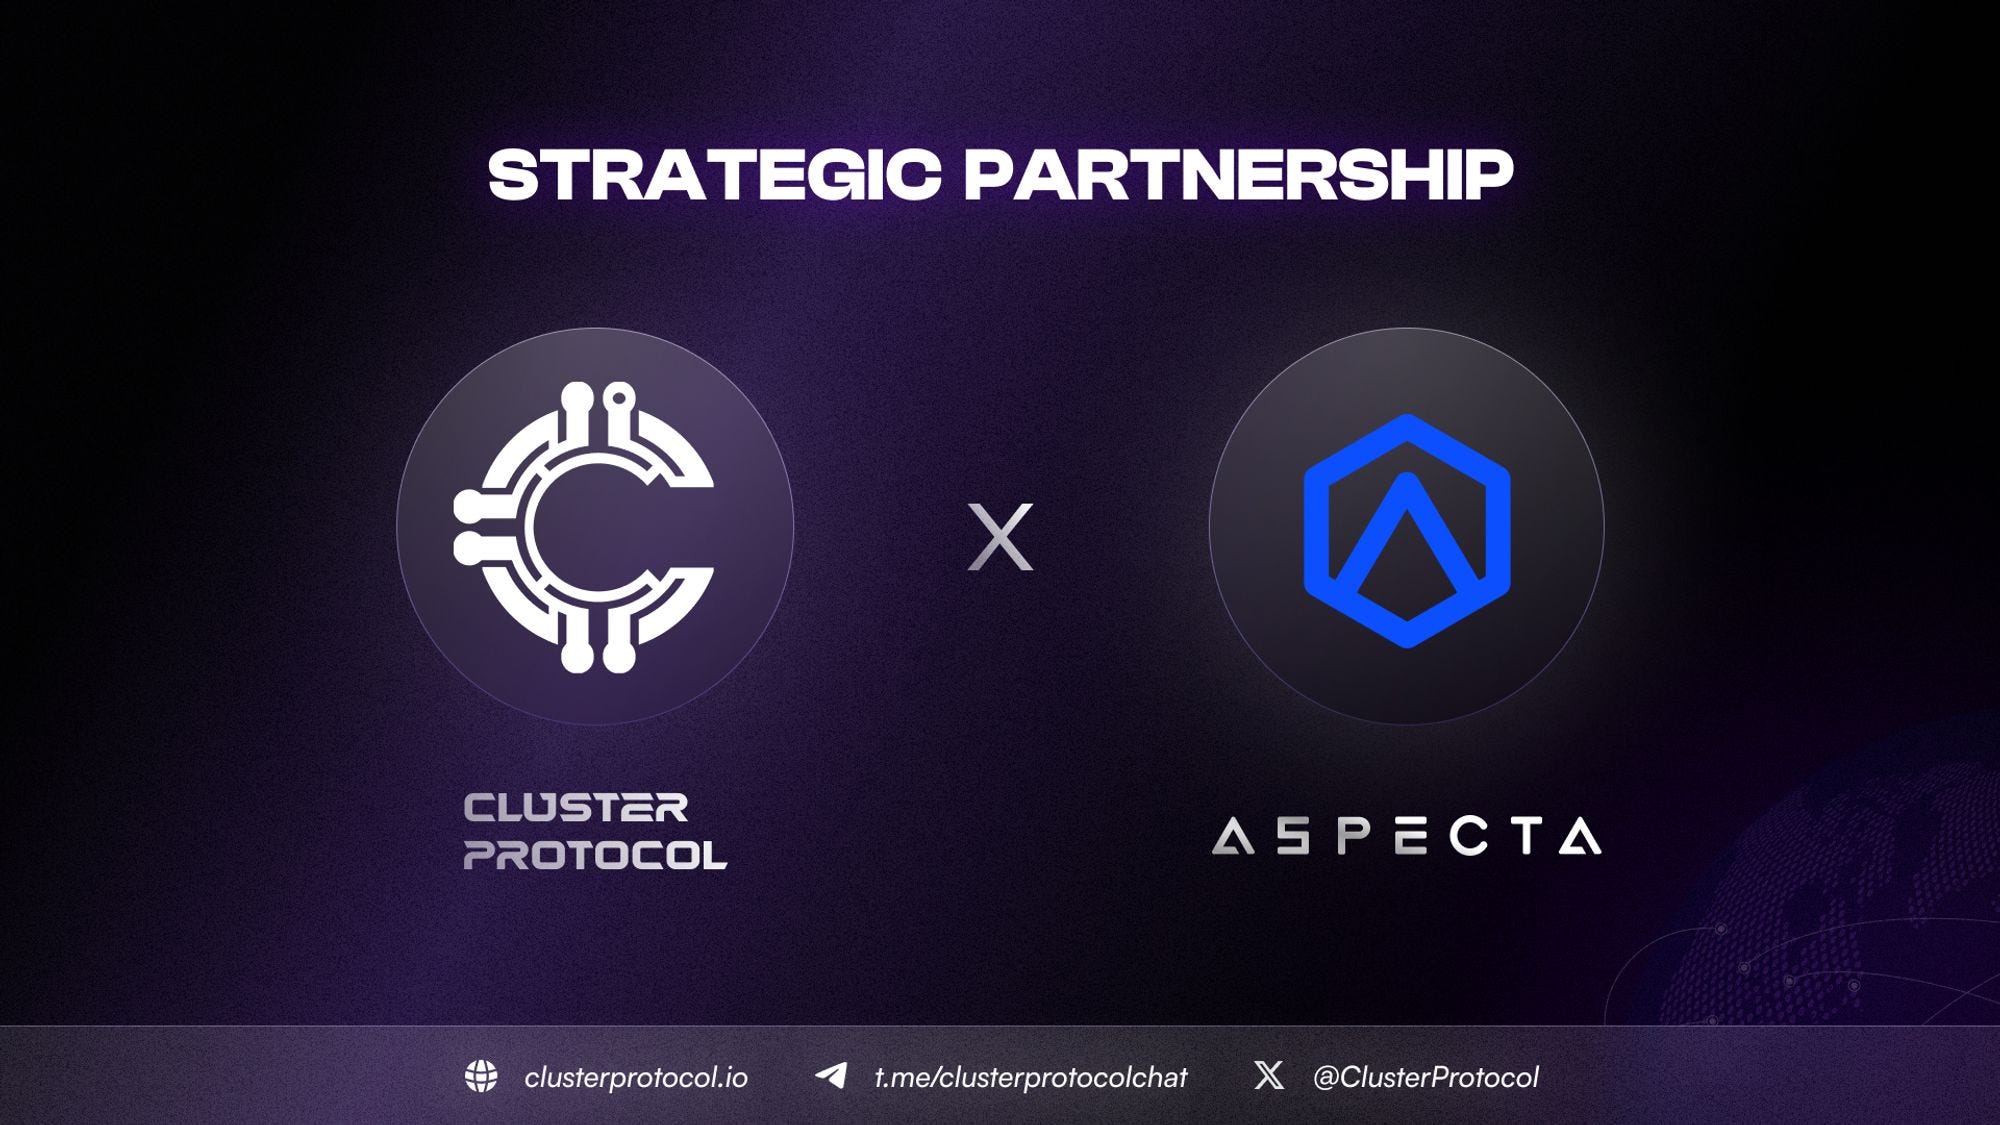 The Dynamic Partnership of Cluster Protocol and Aspecta